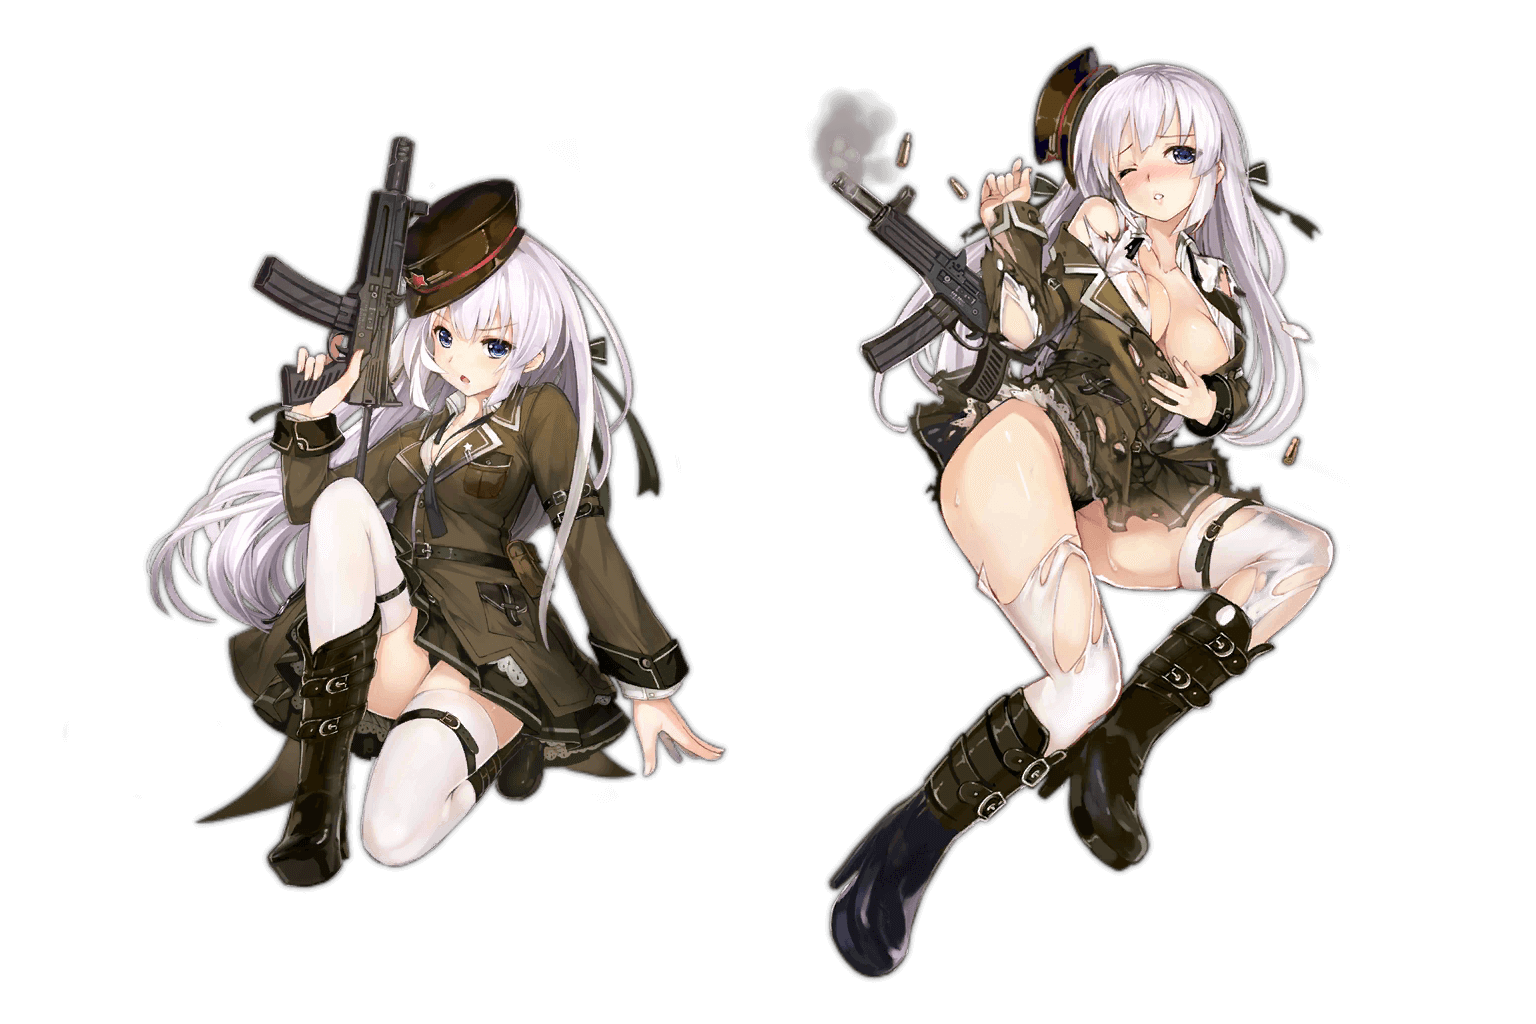 Standard and Damaged art for SMG OTs-39 in Girls' Frontline